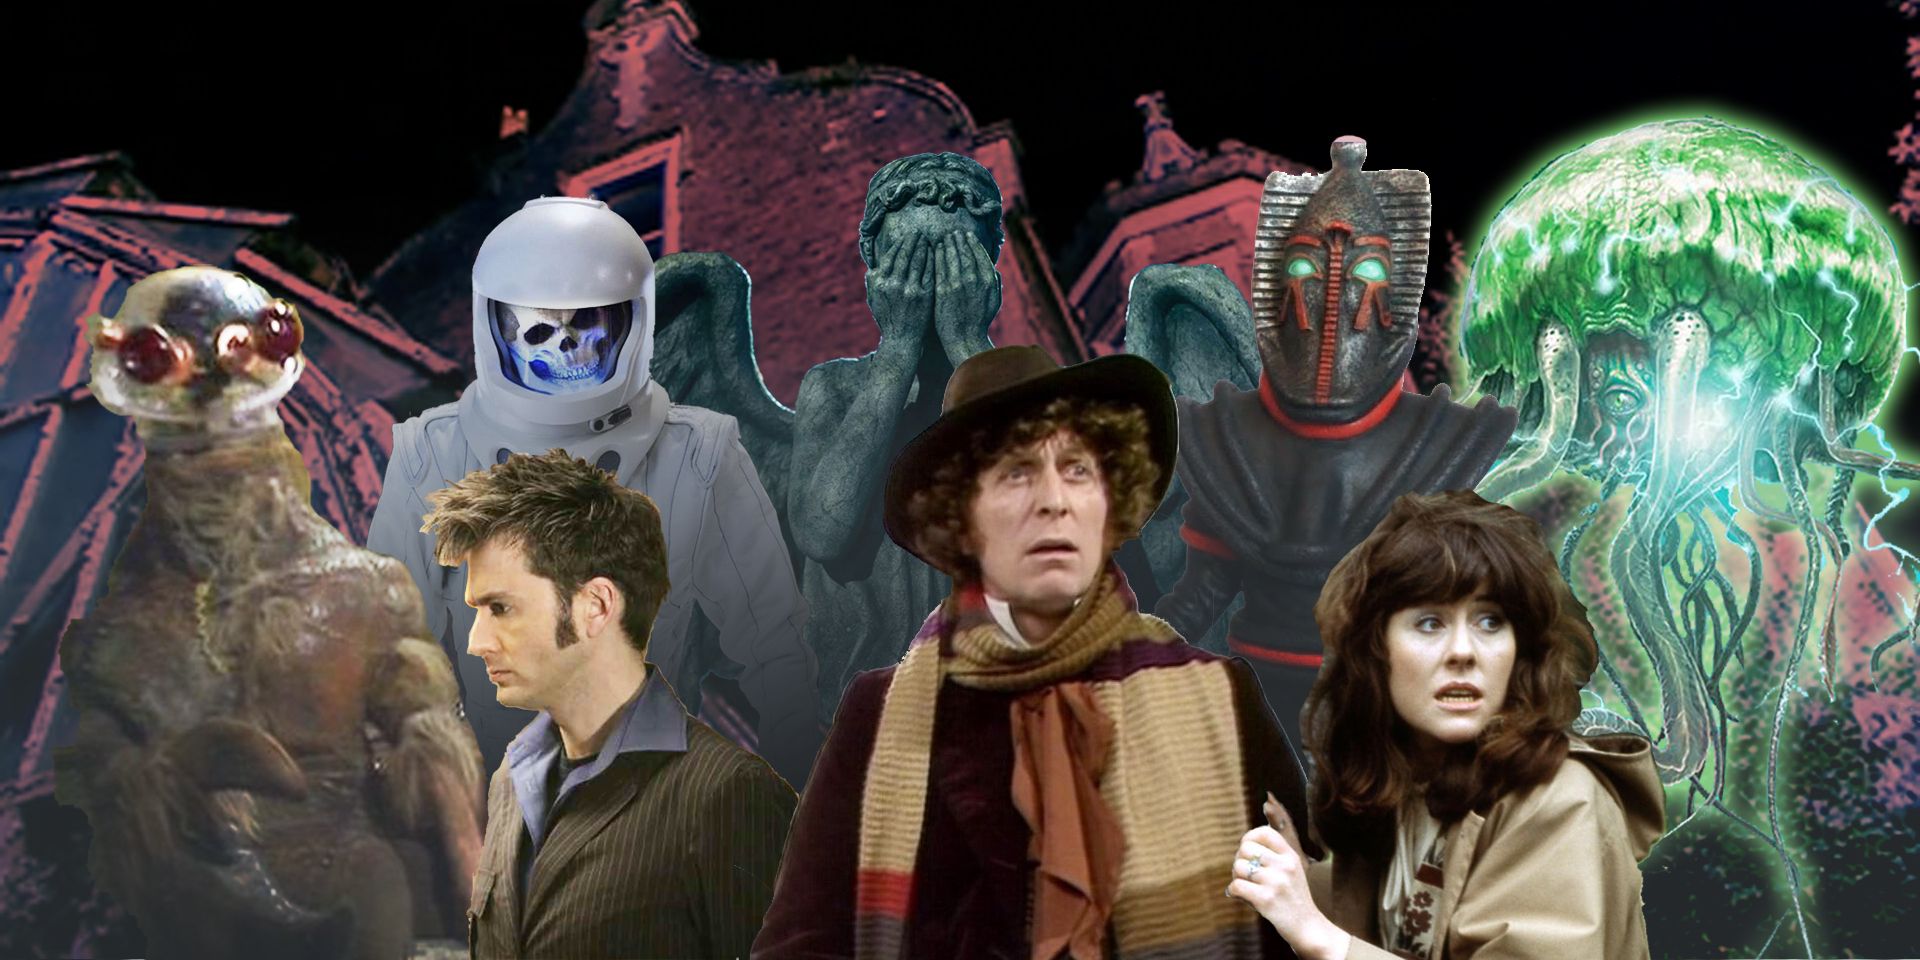 The Doctor and Sarah Jane stand in front of the series' best monsters.